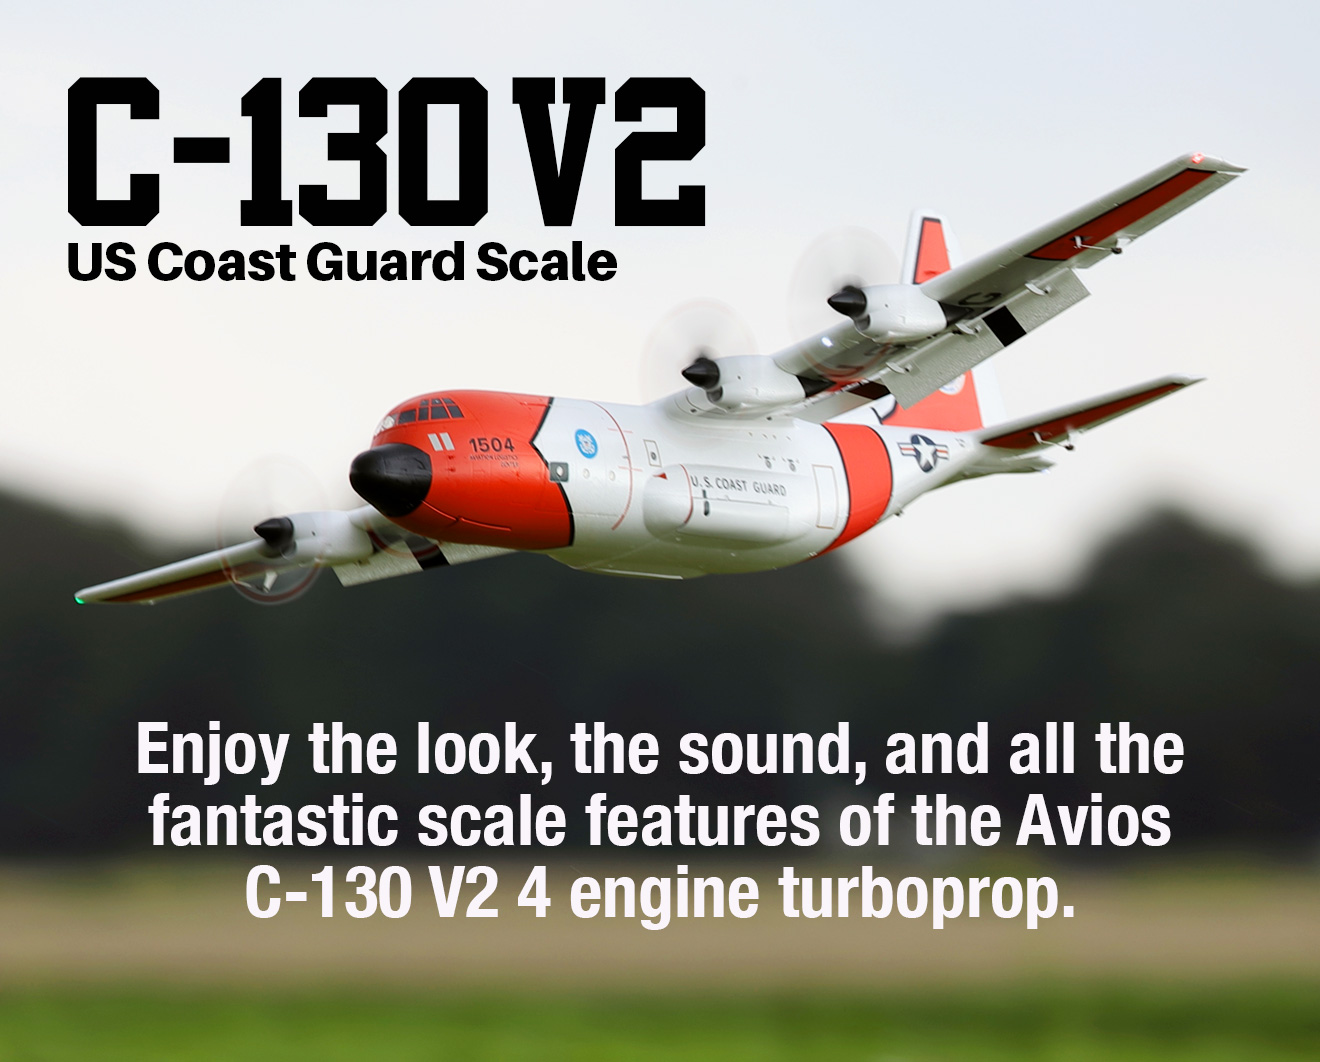 The Avios C-130 V2: Enjoy the look, the sound, and all the fantastic scale features of  the 4 engine turboprop. 